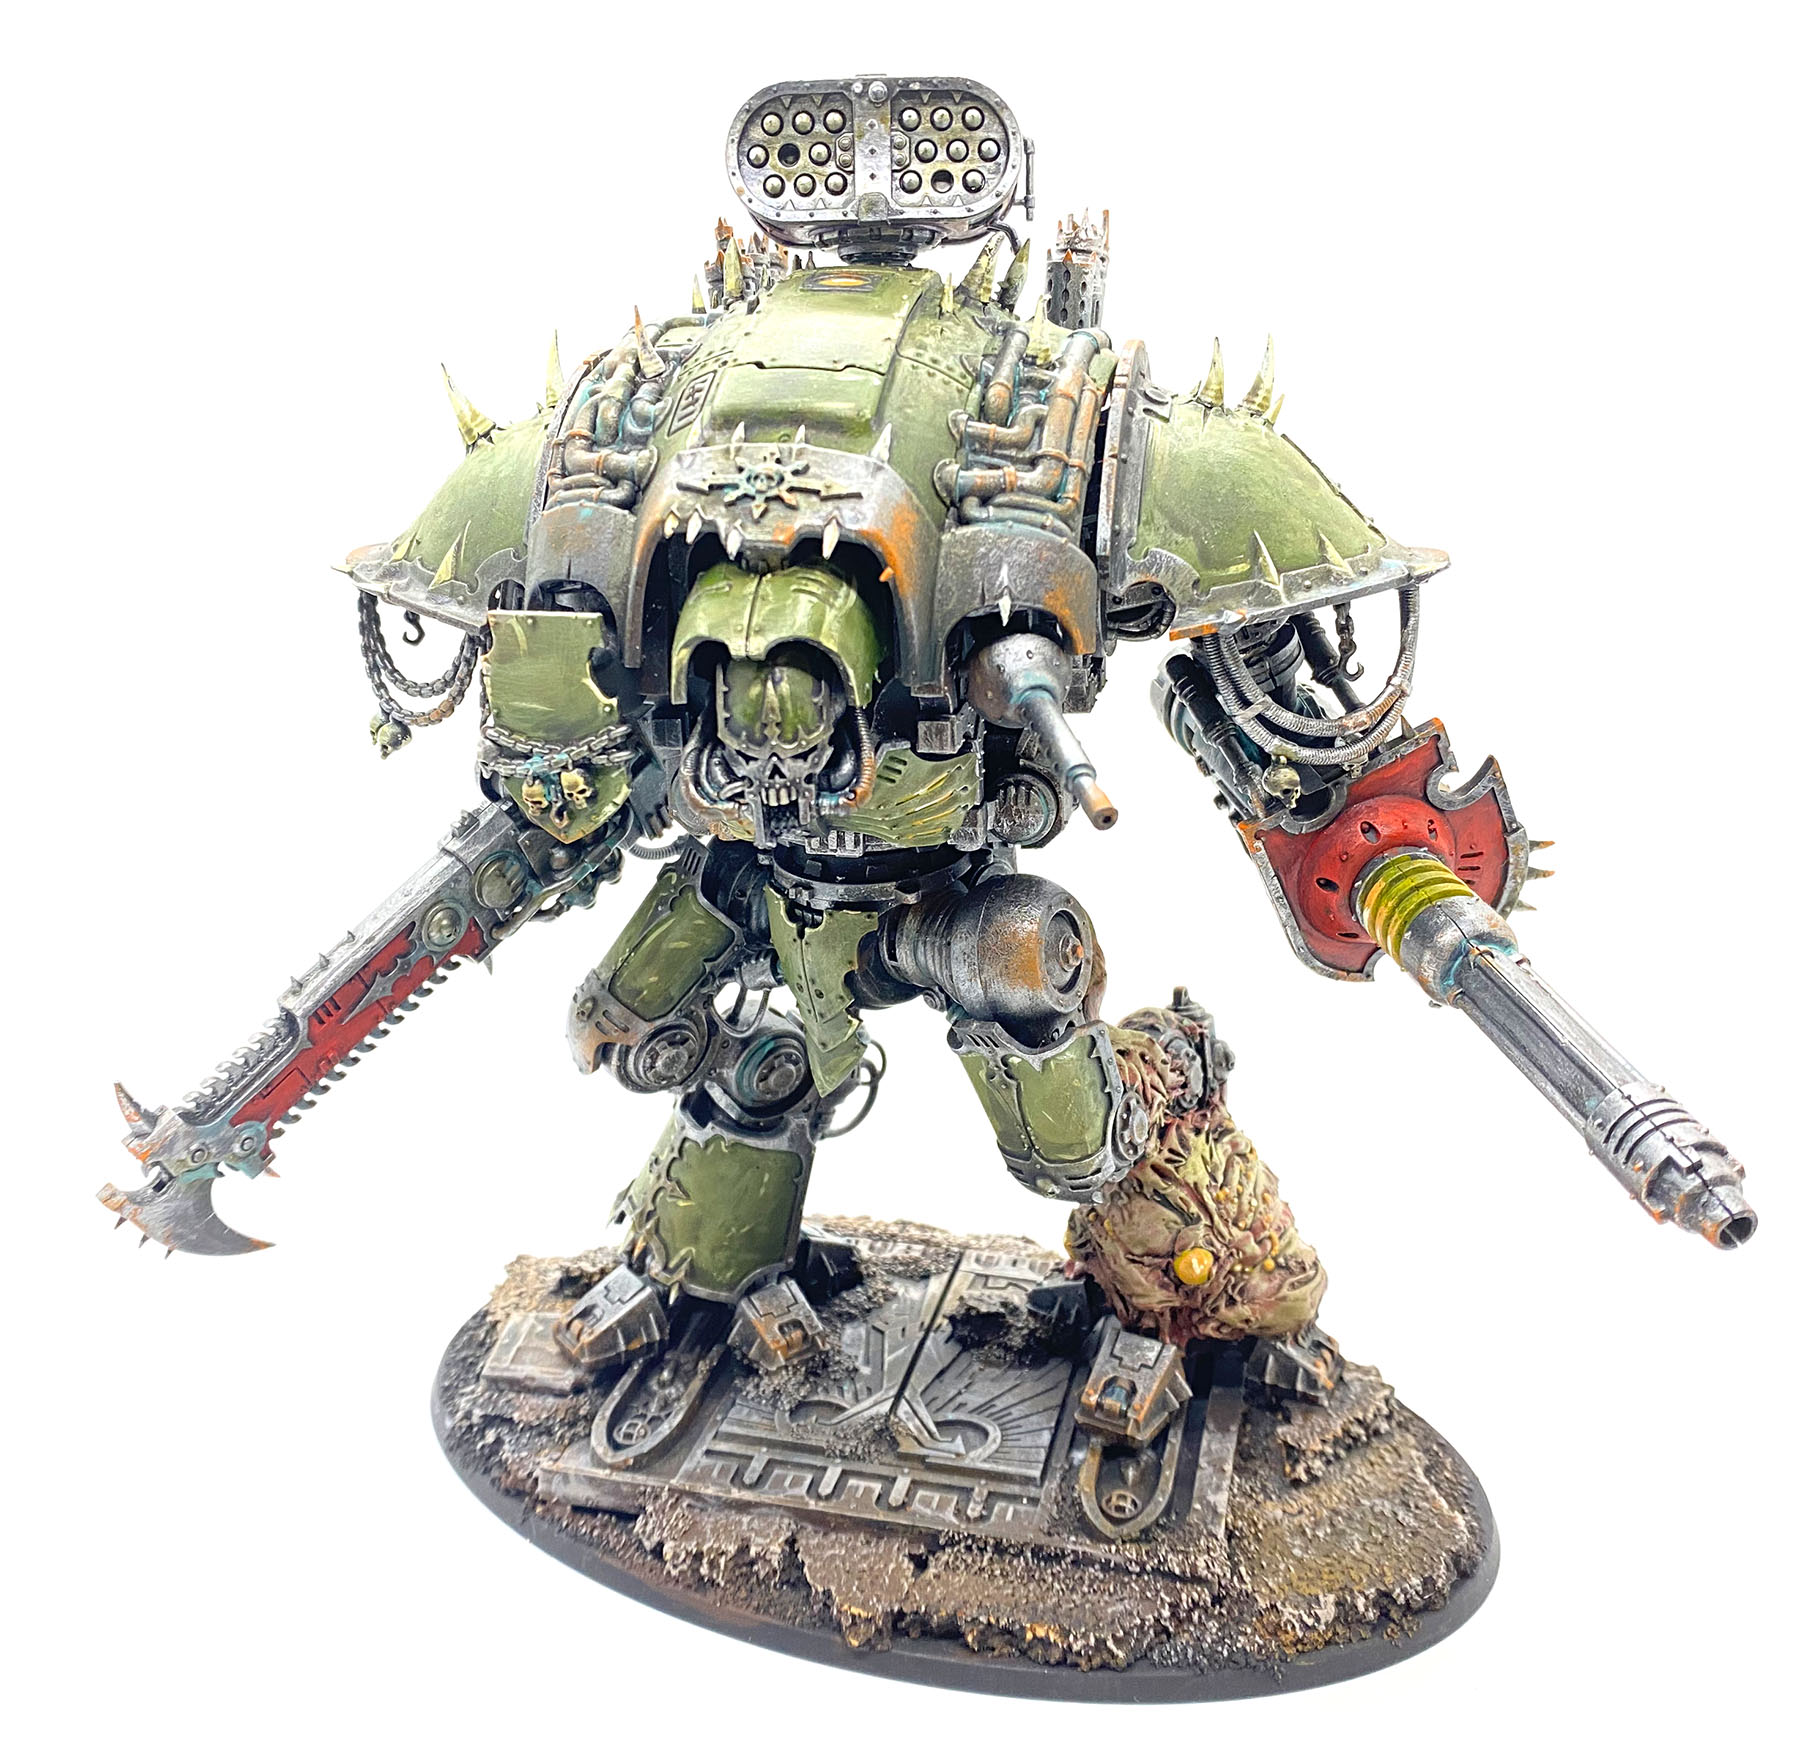 Goatboy S 40k I Ve Got A Thing For Chaos Knights Bell Of Lost Souls